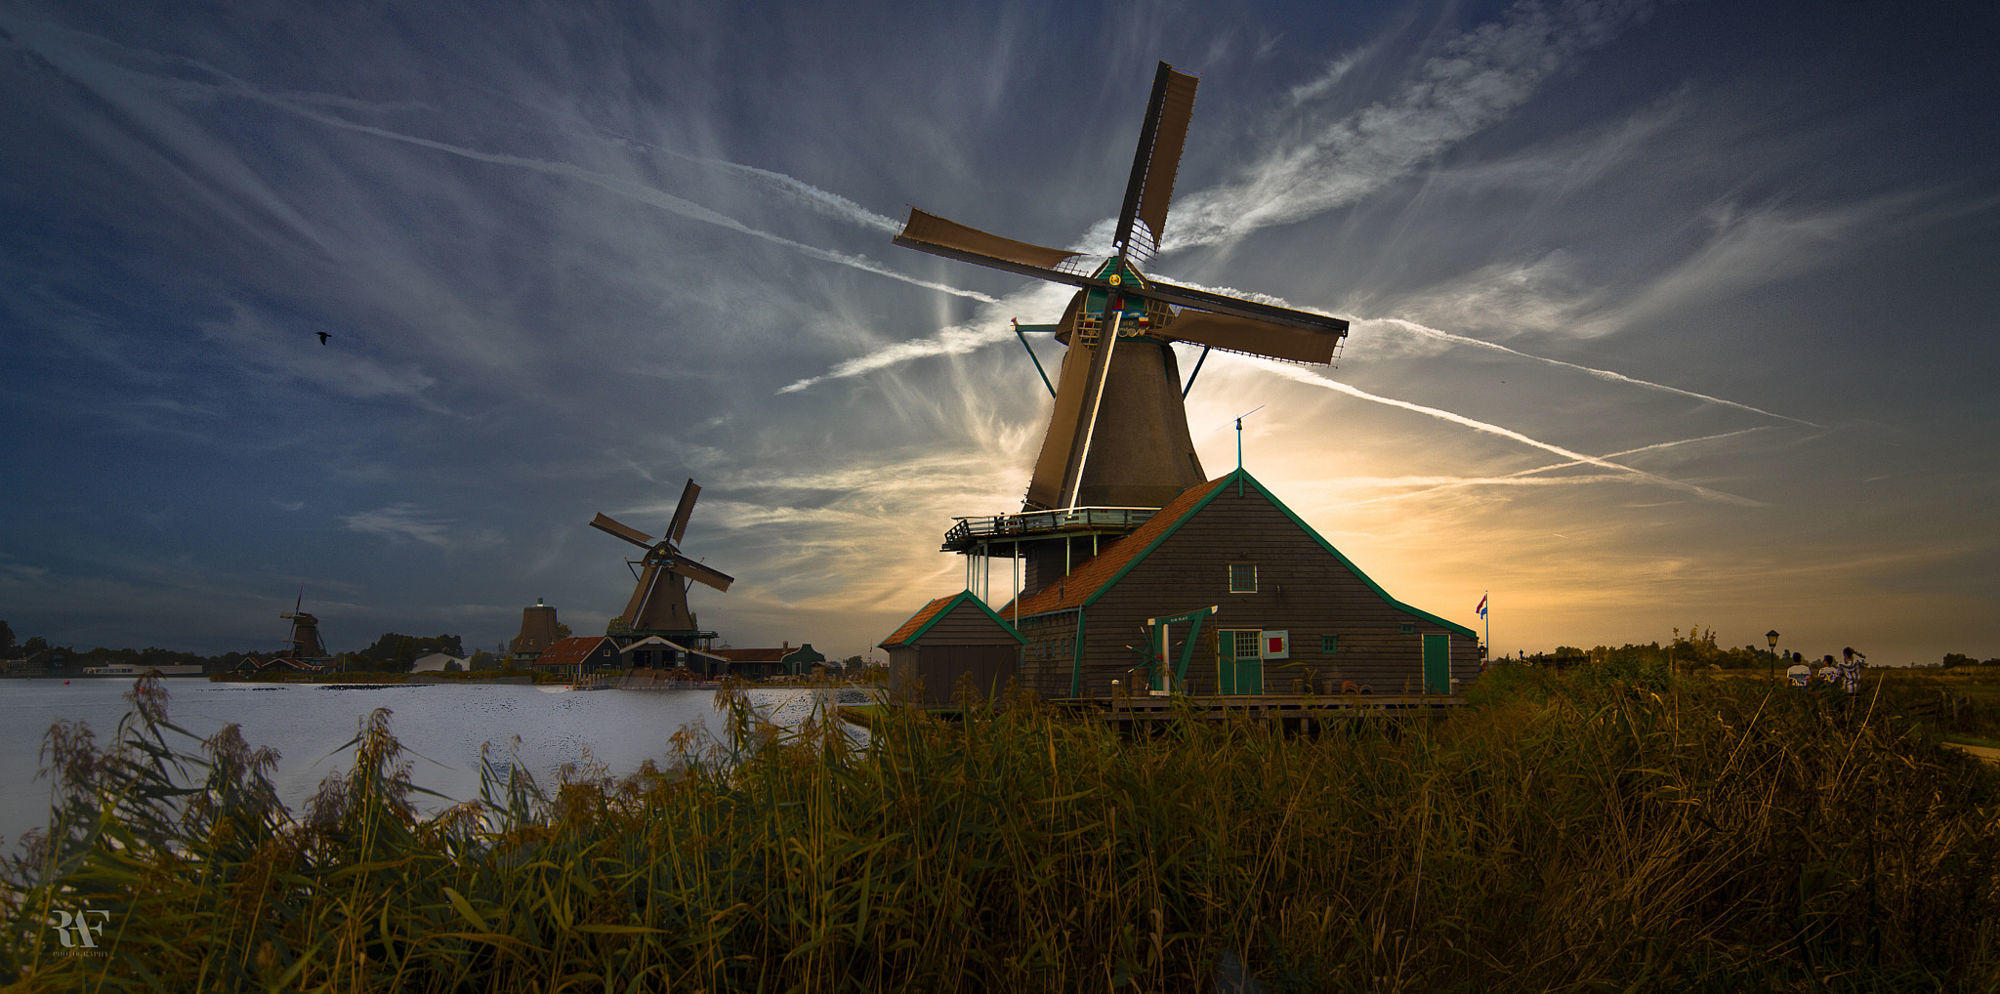 The Sky and  the Windmills